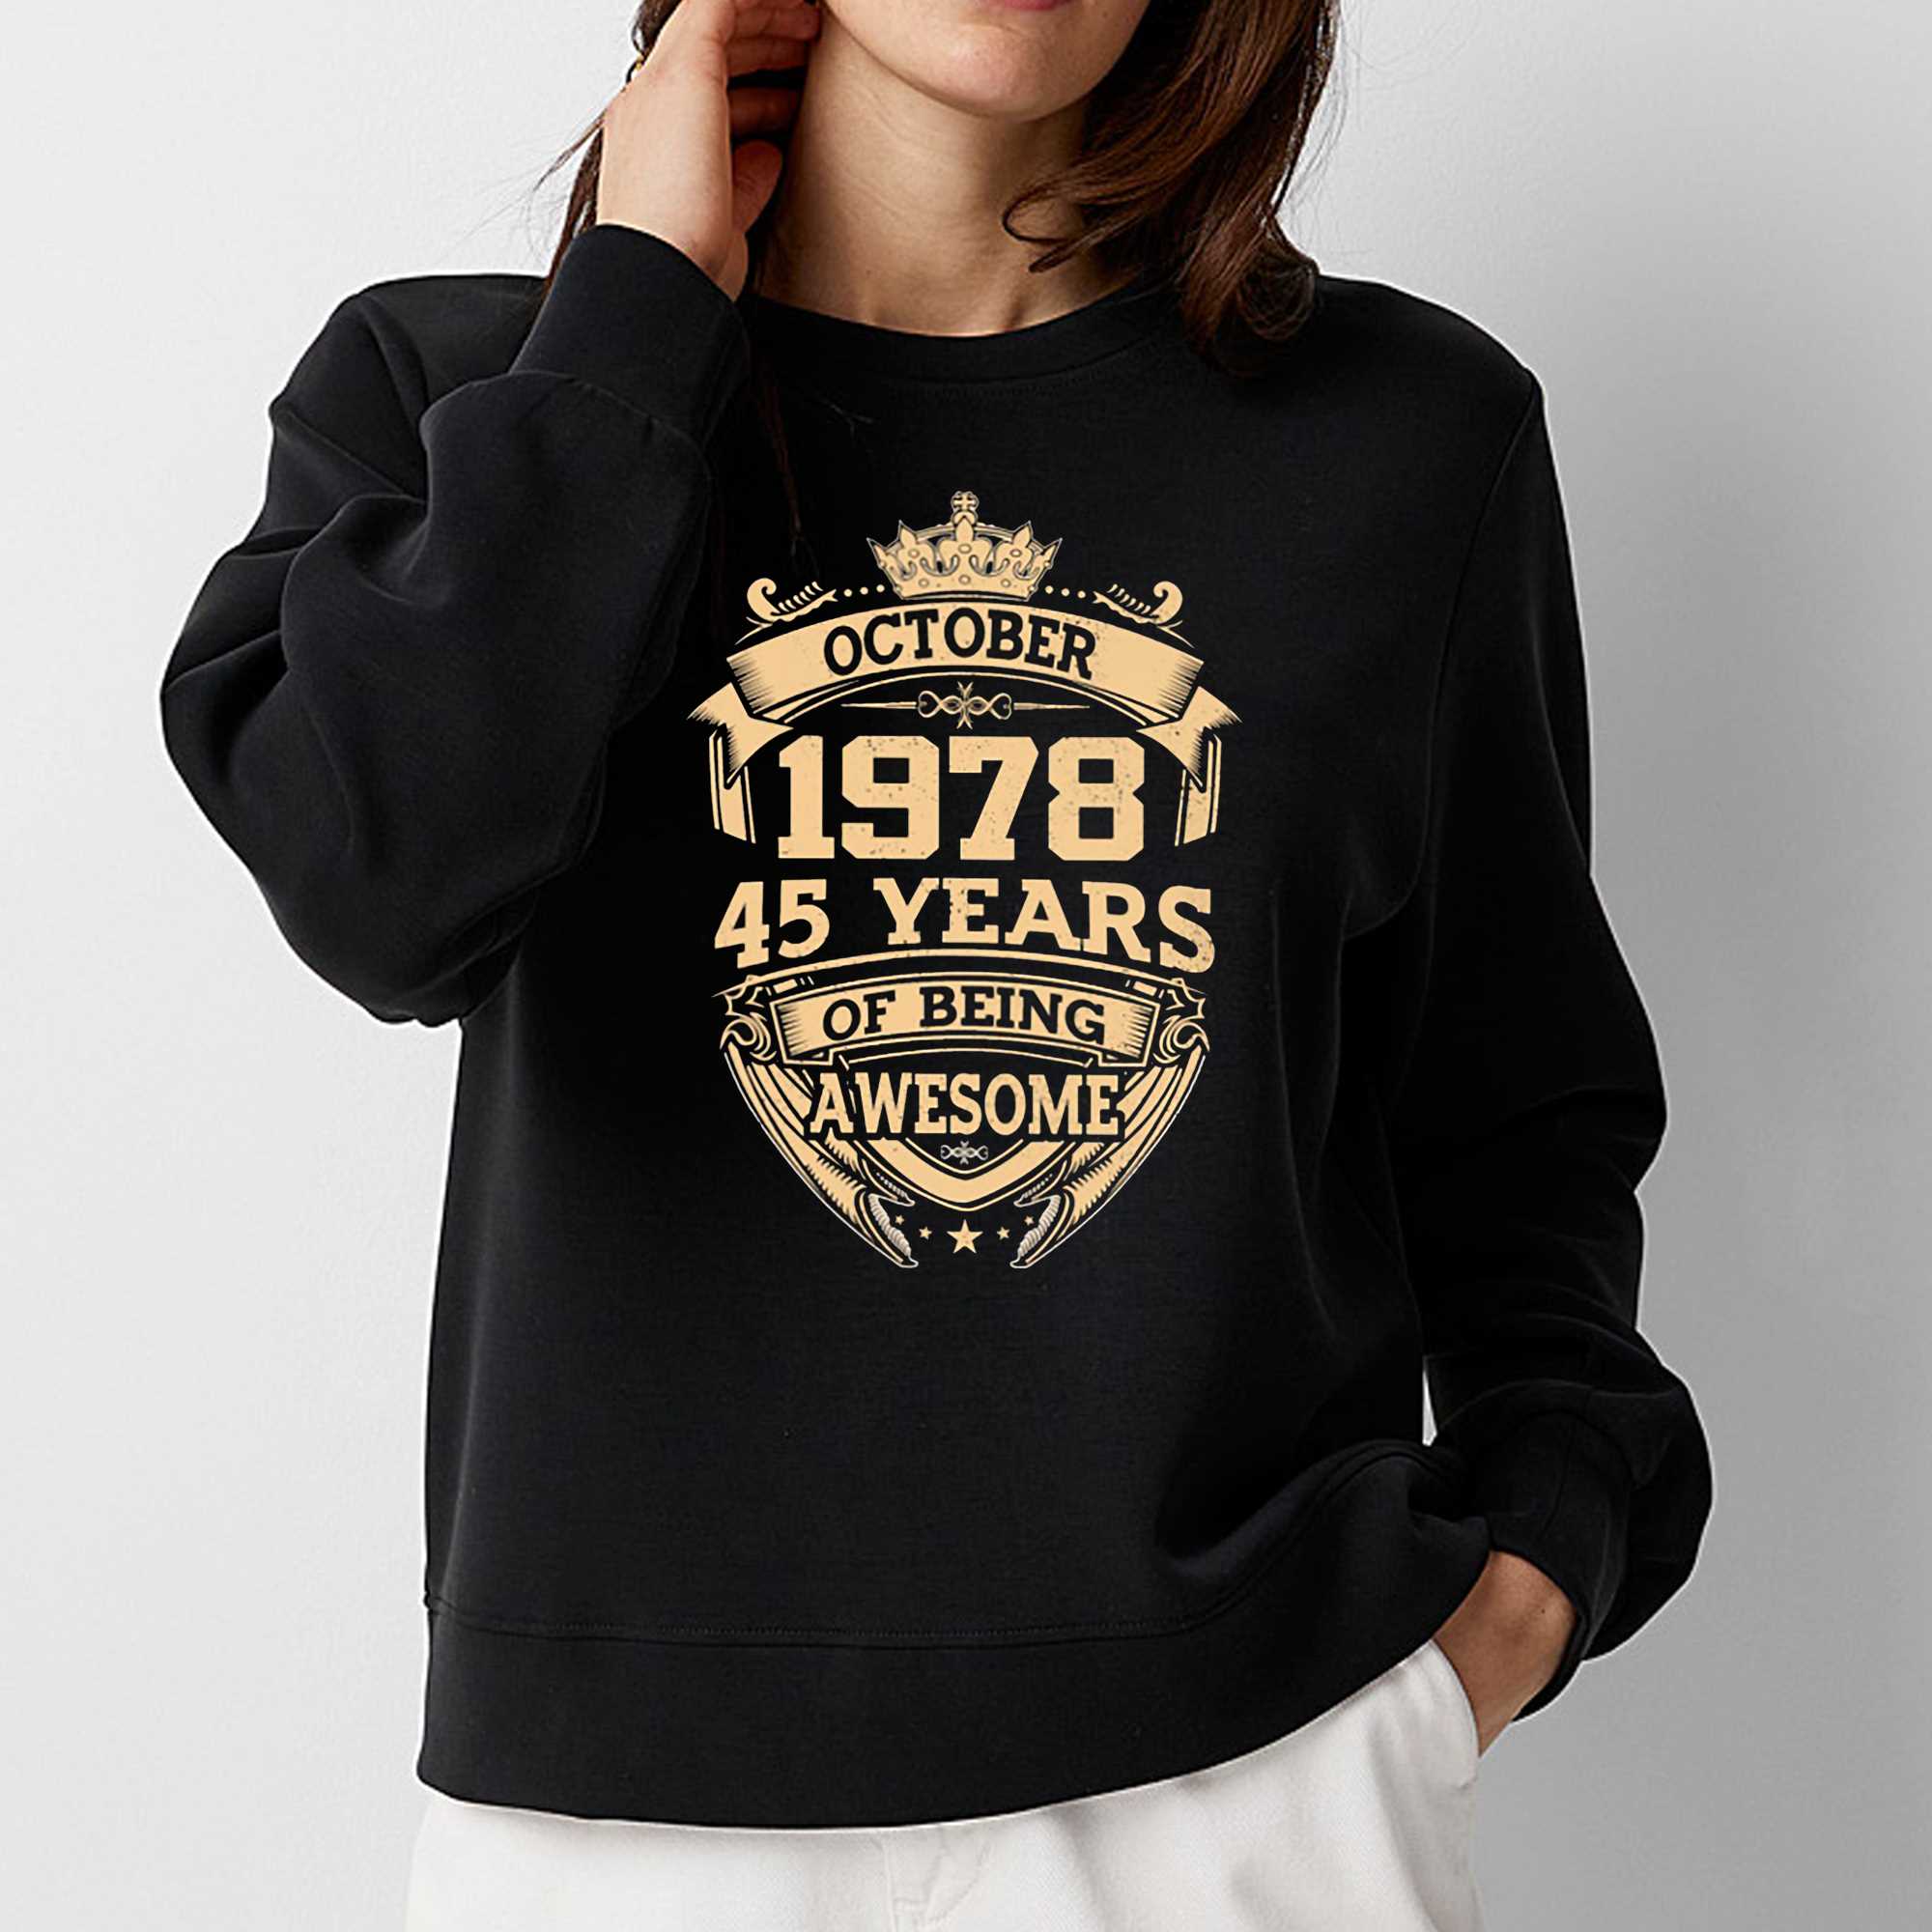 October 1978 45 Years Of Being Awesome T-shirt 